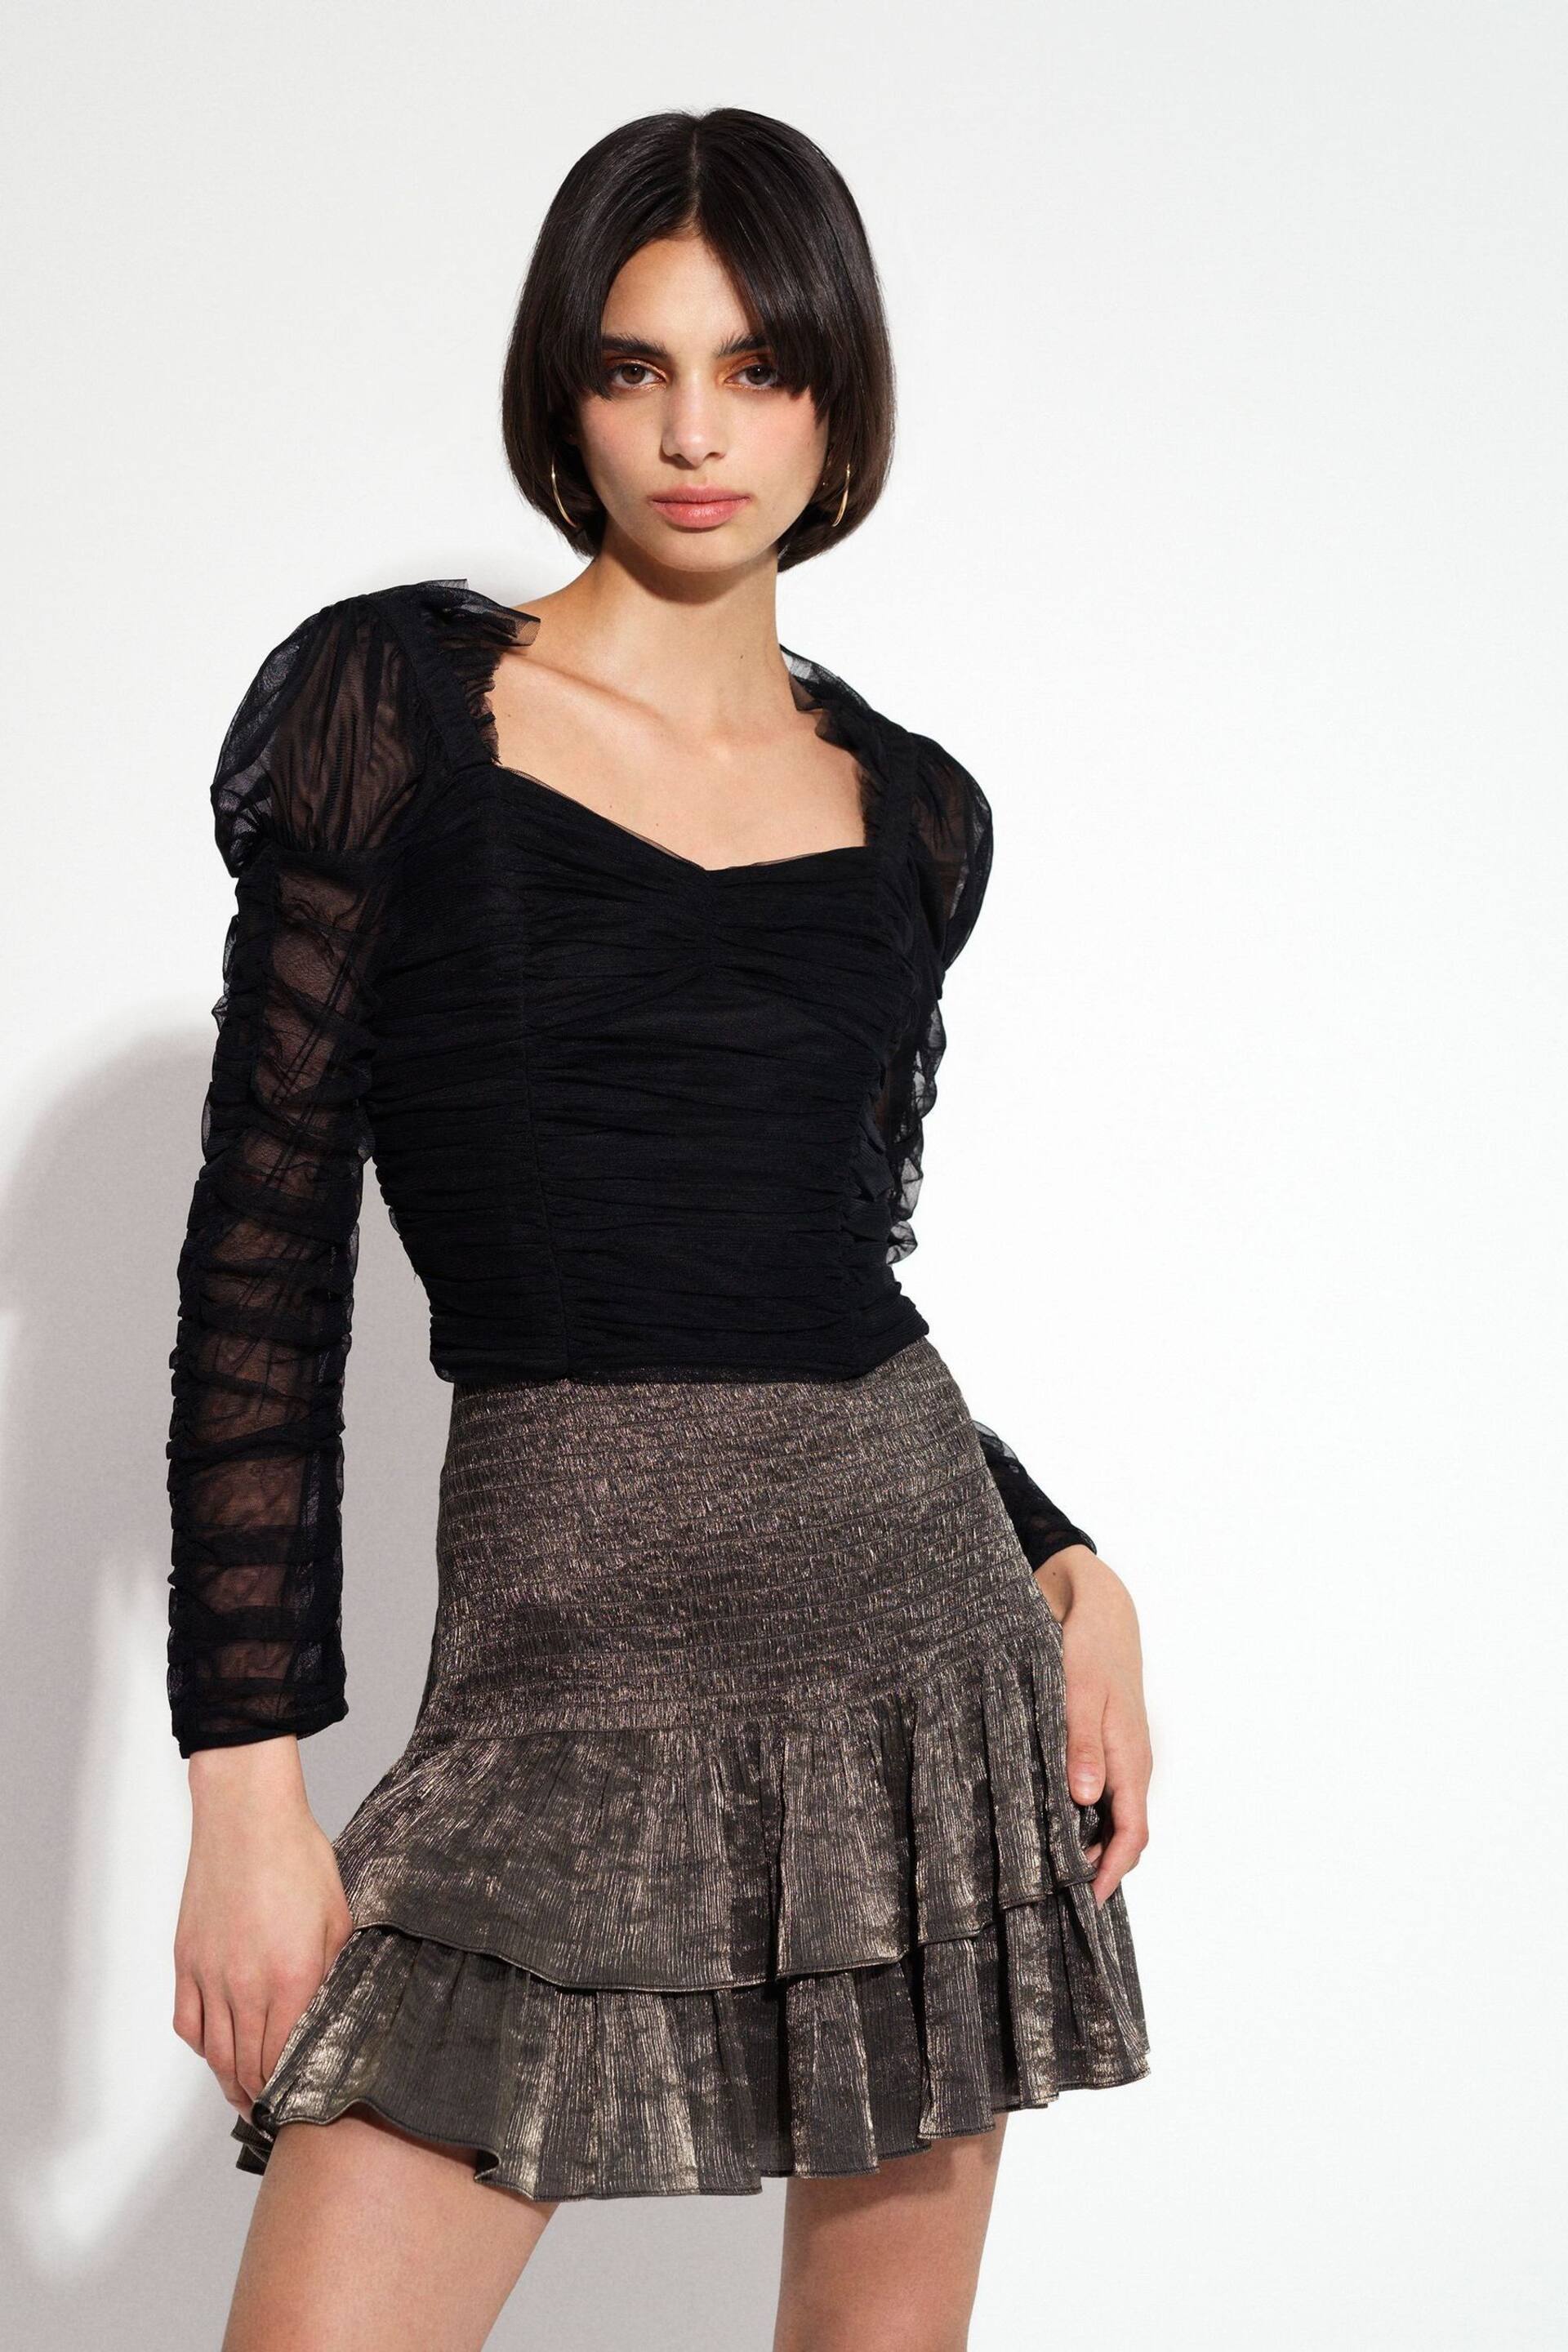 French Connection Dafne Satin Skirt - Image 1 of 5